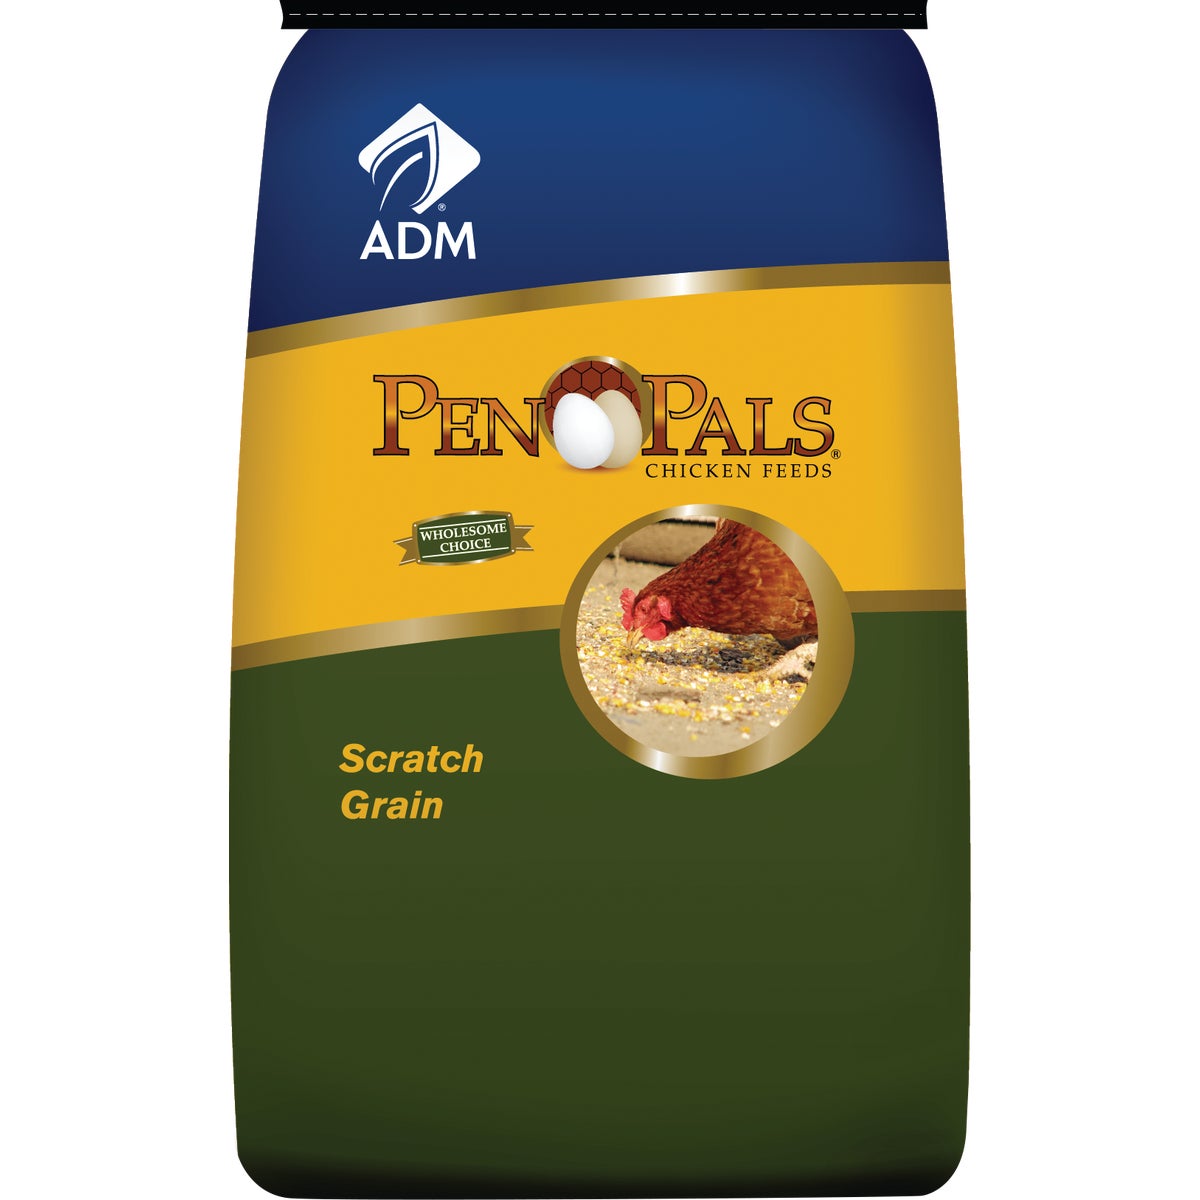 Item 704055, All-purpose grain mix for poultry.